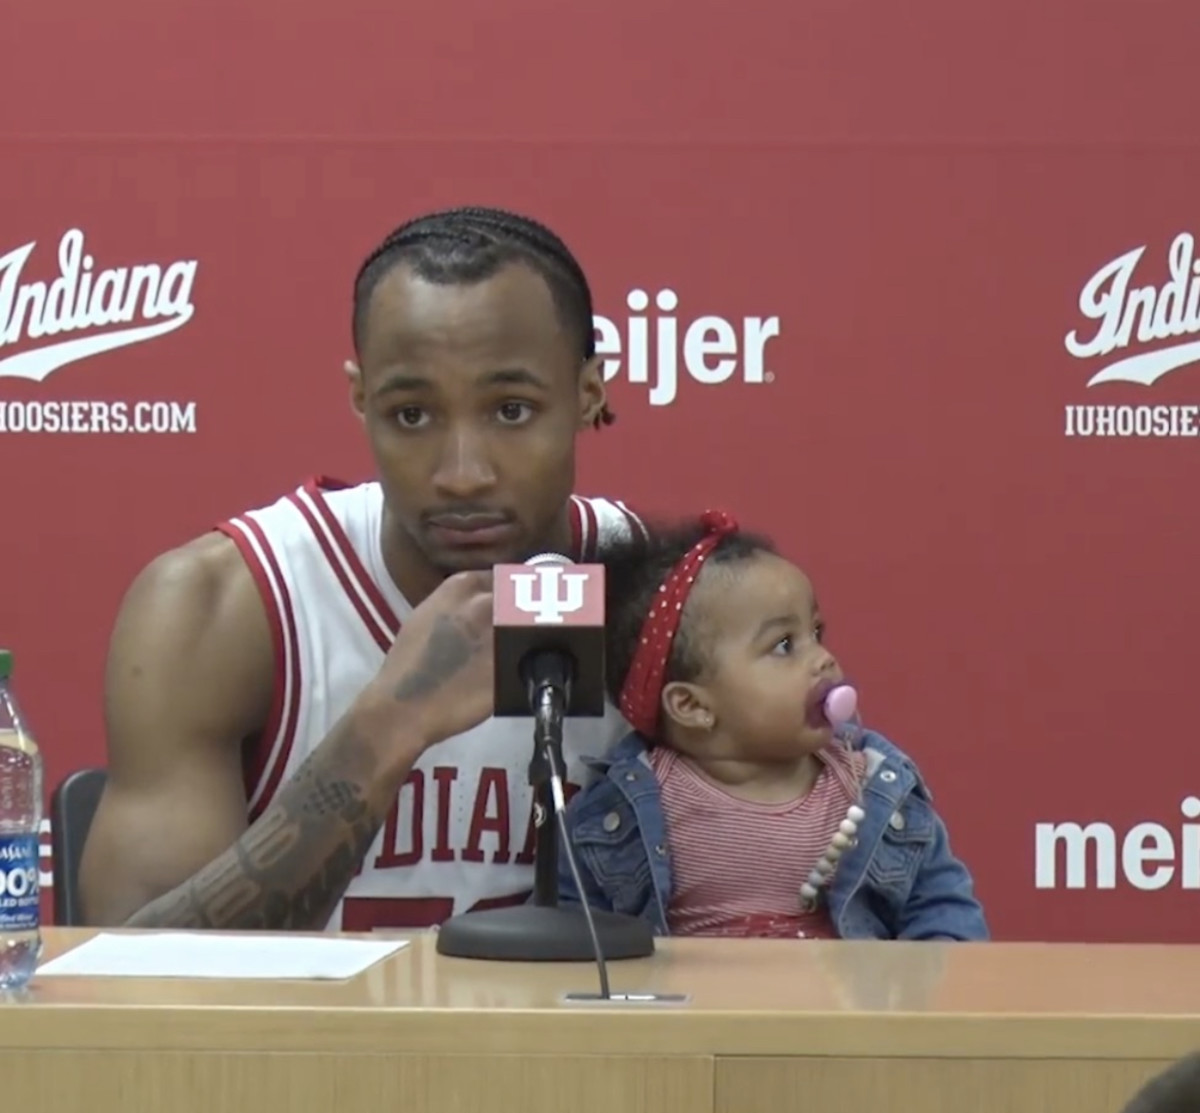 Indiana sophomore guard Tamar Bates answers questions at the postgame press conference with his daughter Leilani, who won the halftime baby race on Sunday at Simon Skjodt Assembly Hall in Bloomington, Ind.